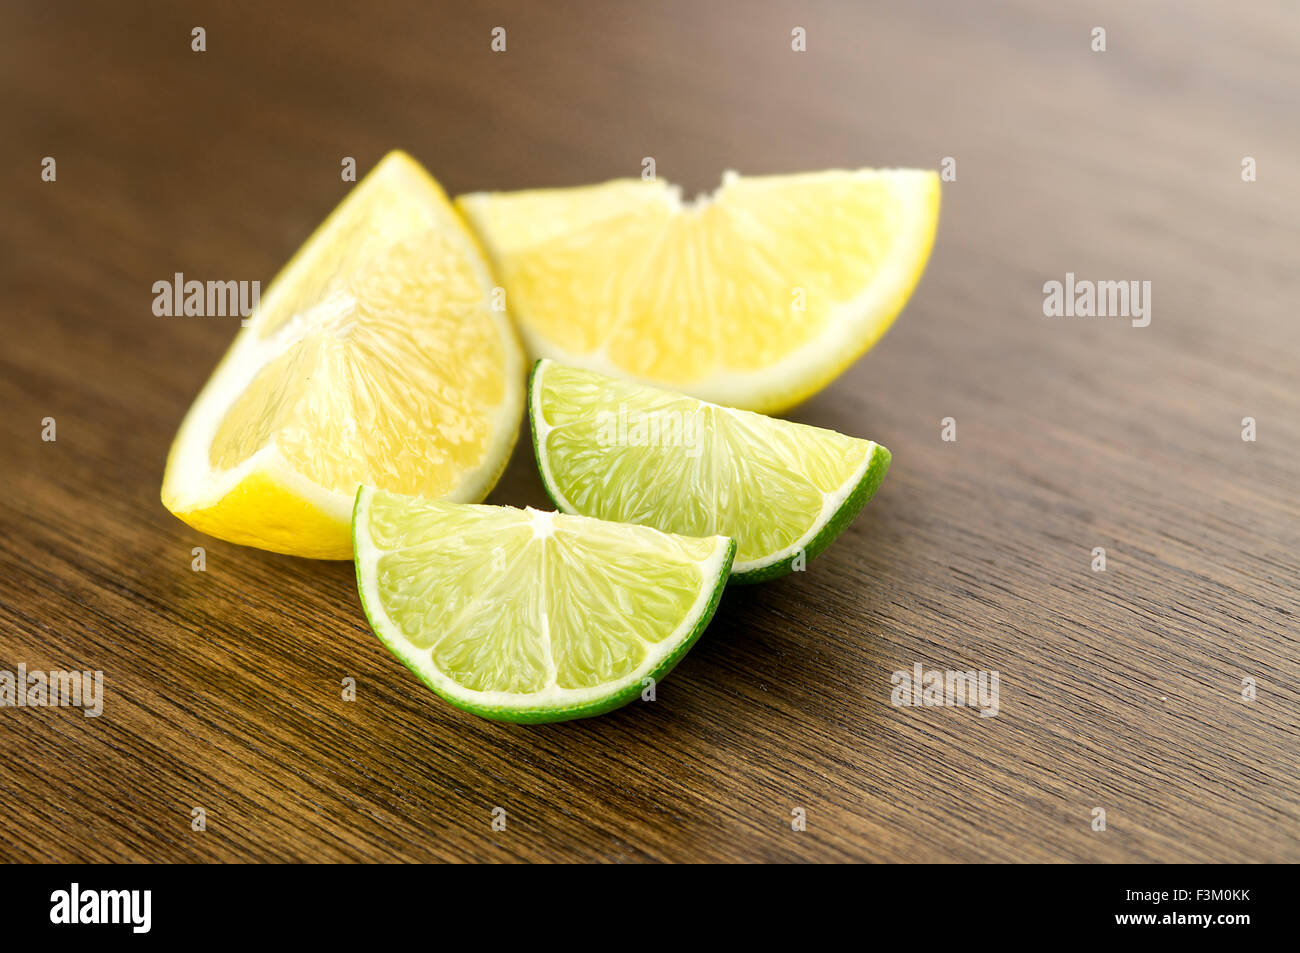 Juicy lemons and limes, cut and diced, on bar counter for drinks Stock Photo